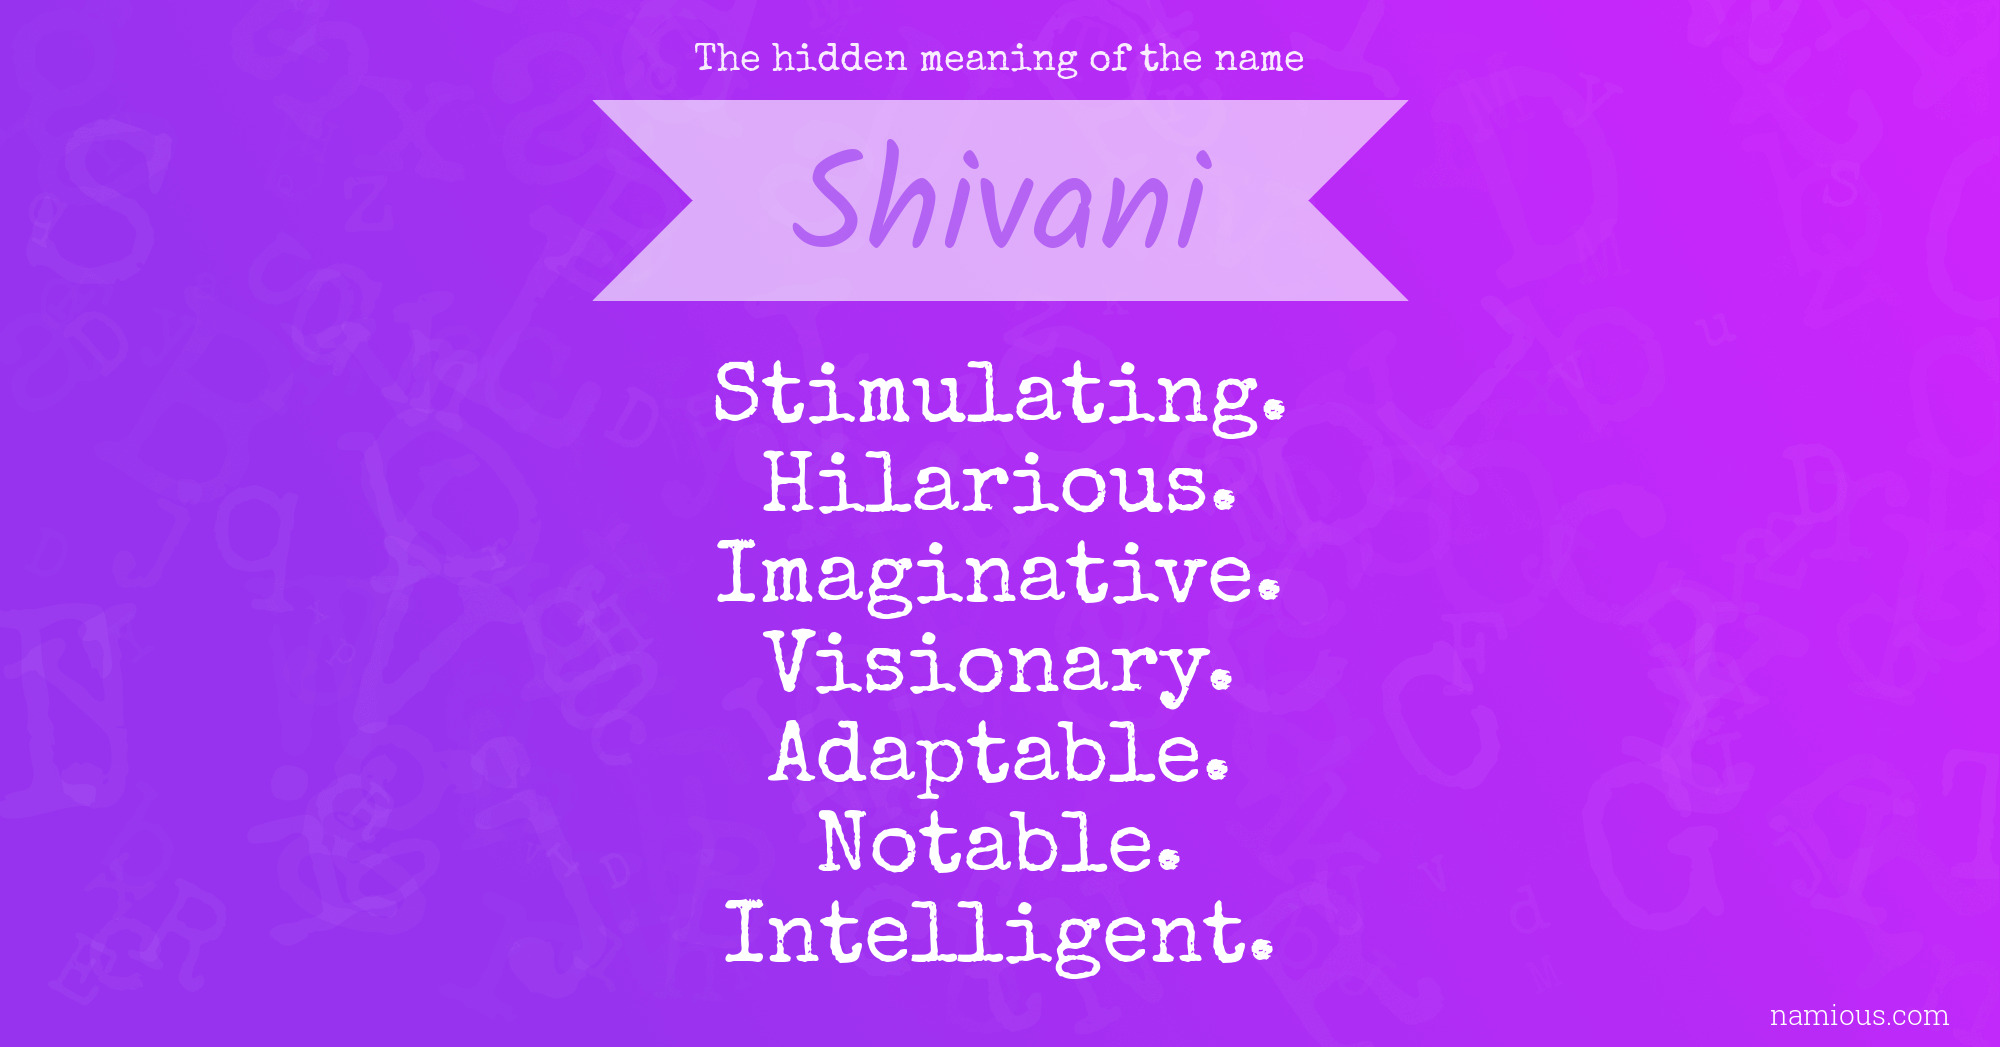 The hidden meaning of the name Shivani